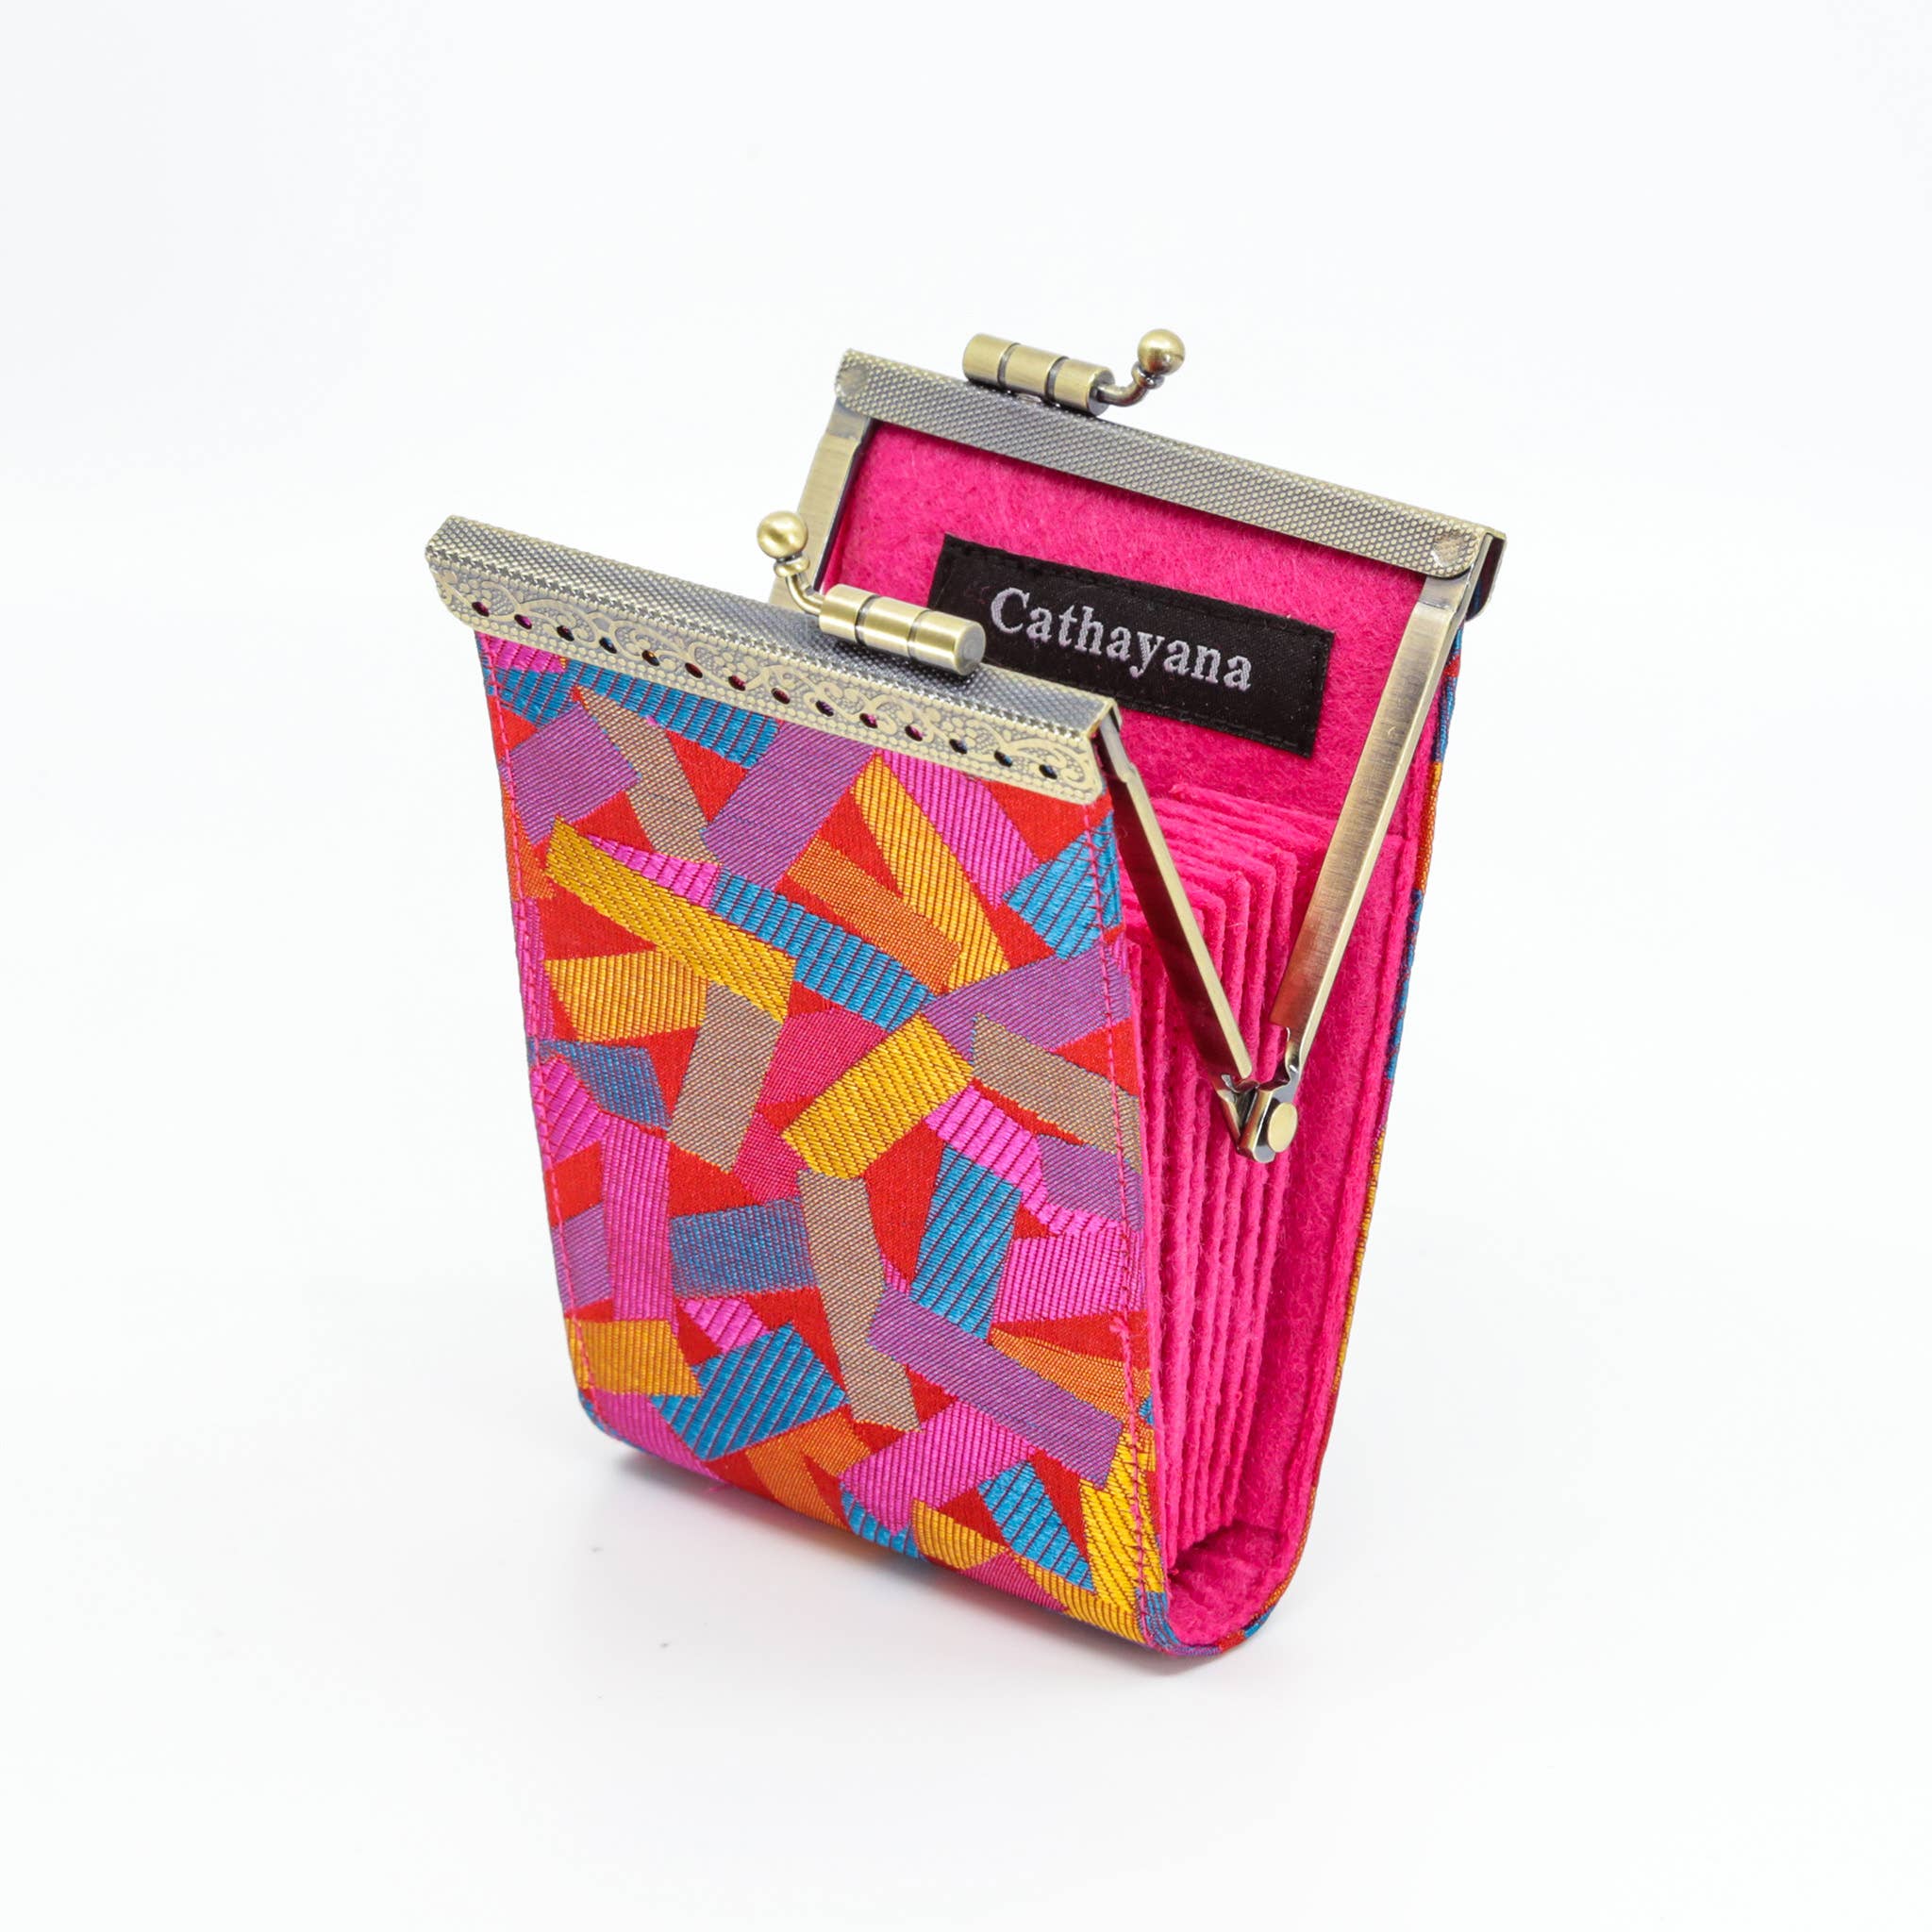 Confetti Pattern Brocade Card Holder with RFID Protection: Fuchsia - Out of the Blue